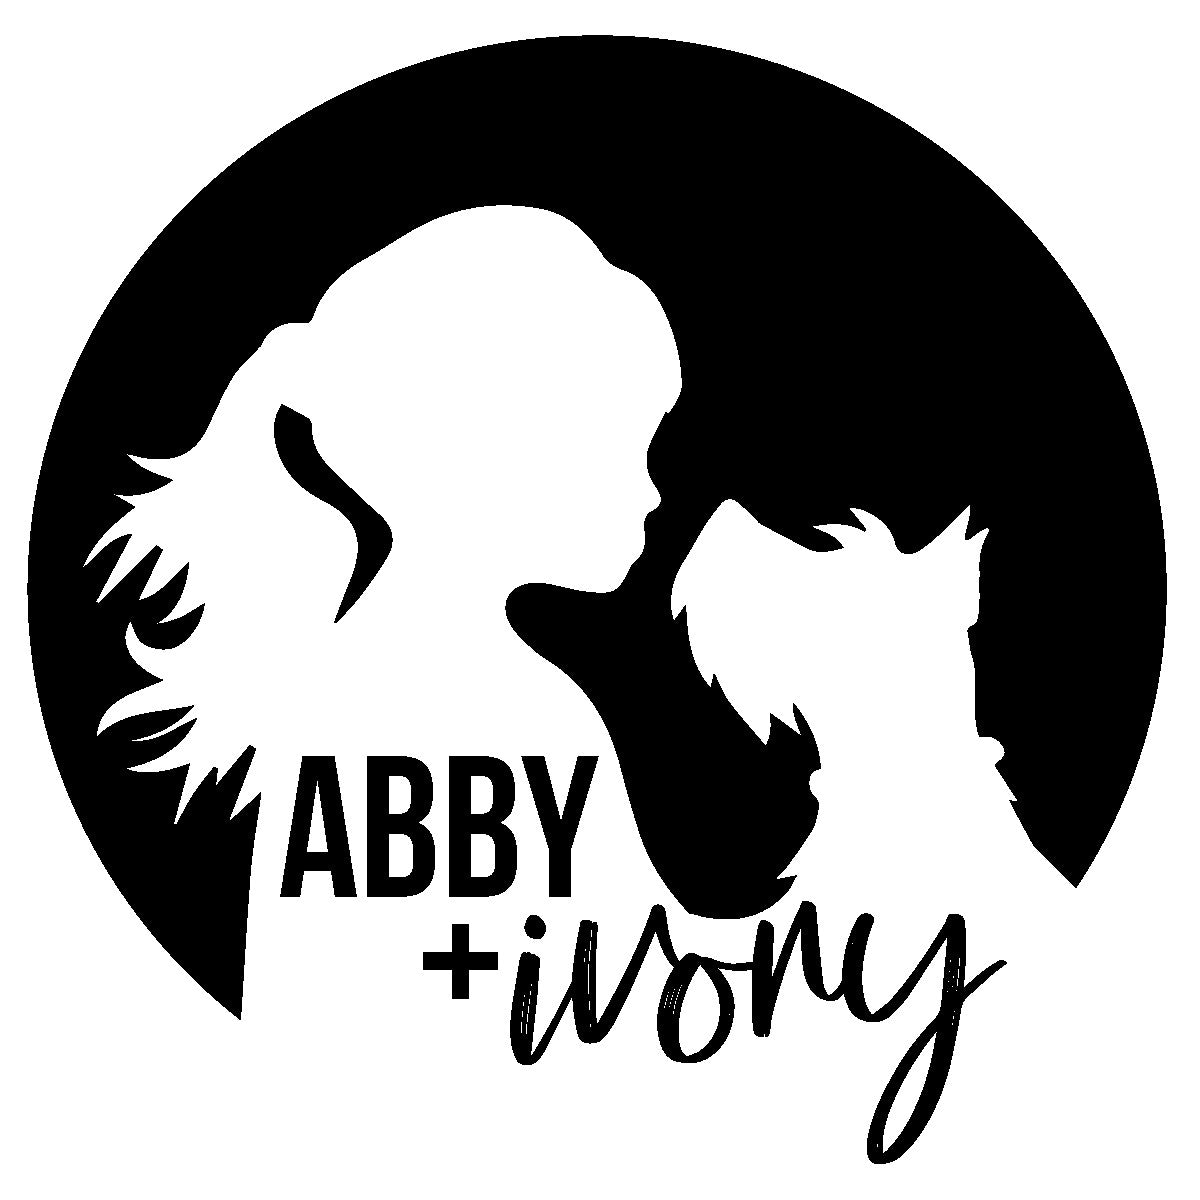 Abby and Ivory